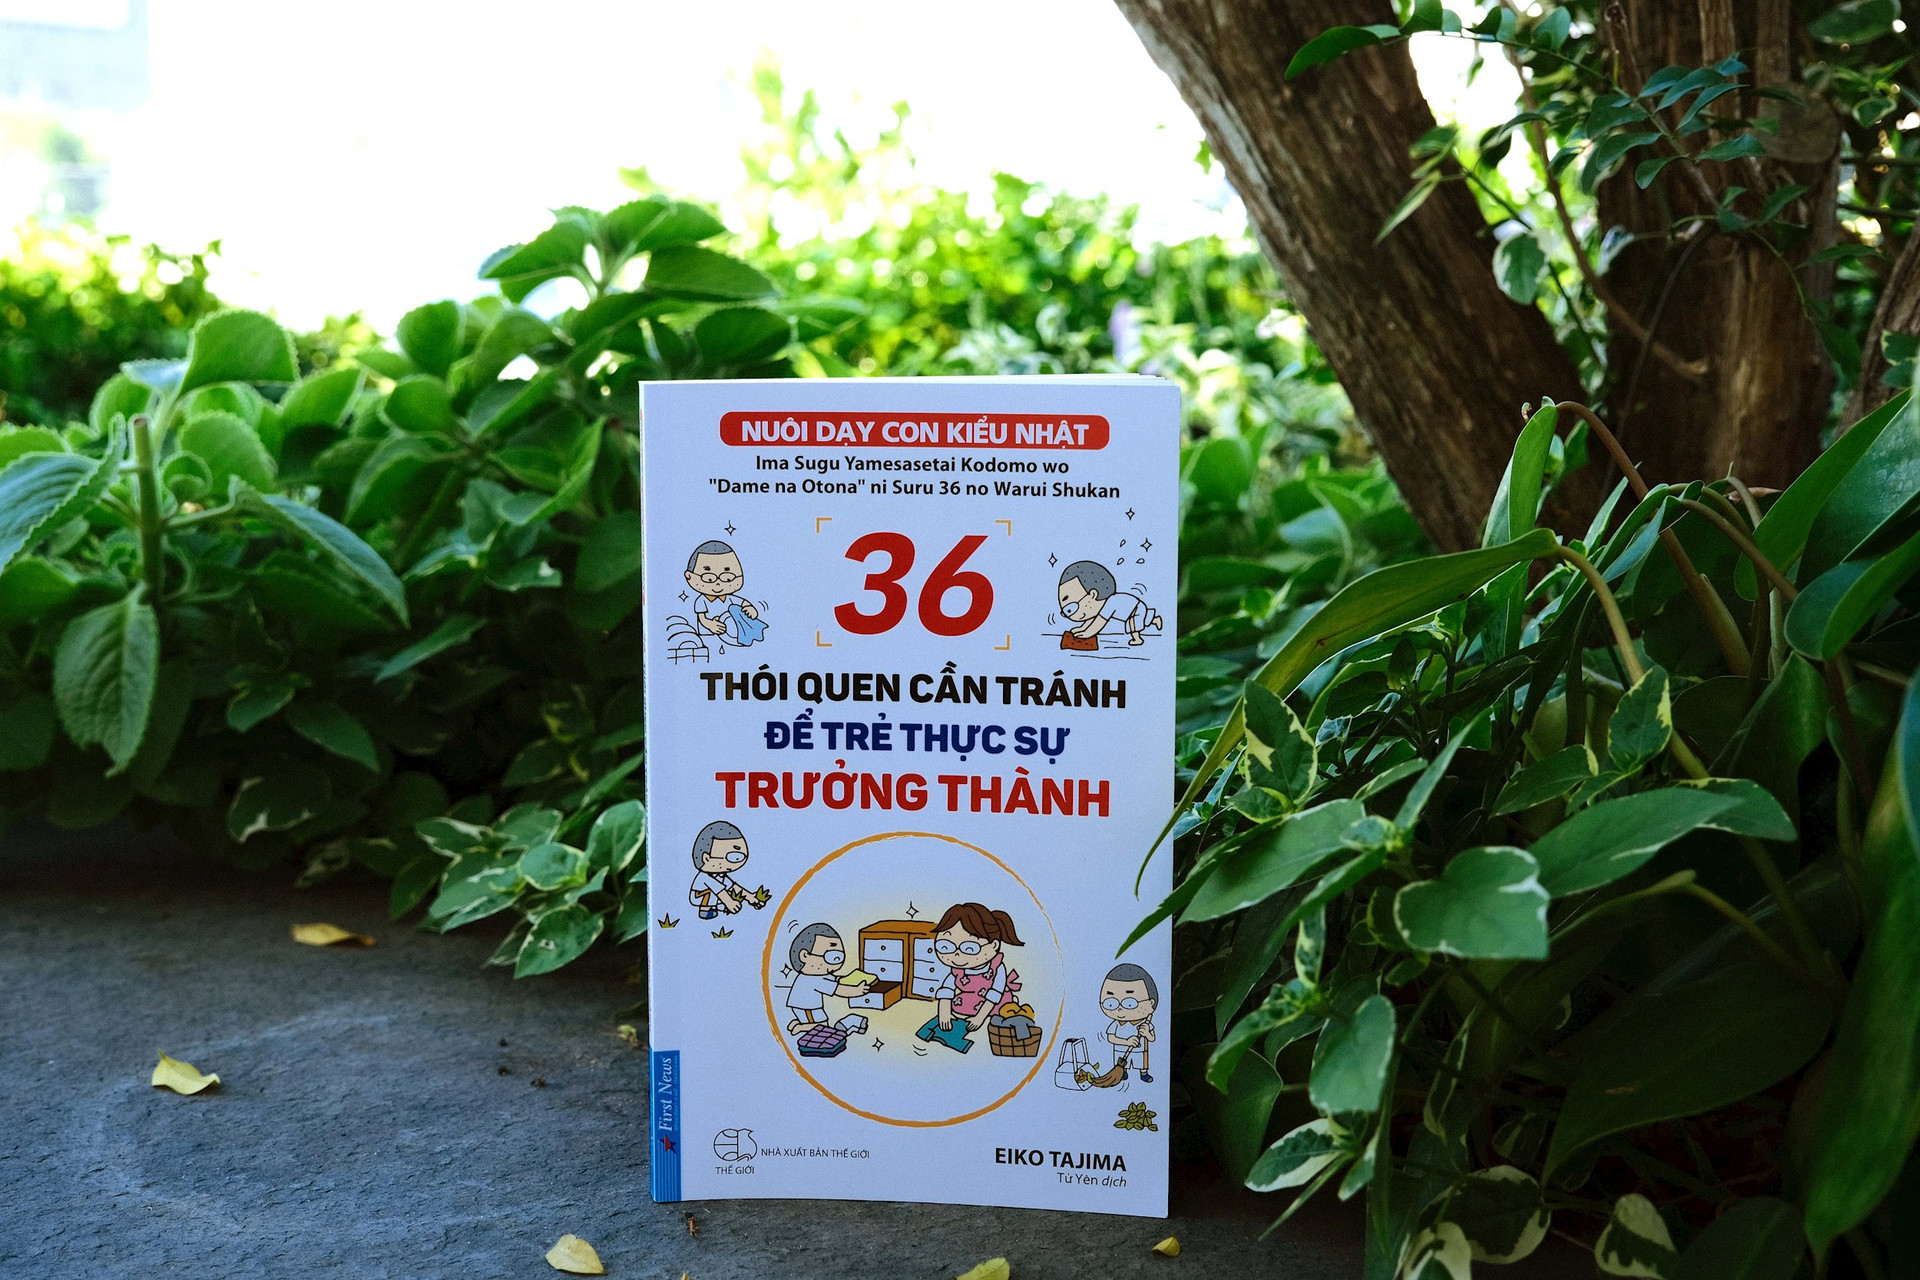 36thoiquencantranhdetretruongthanh-8-.jpg